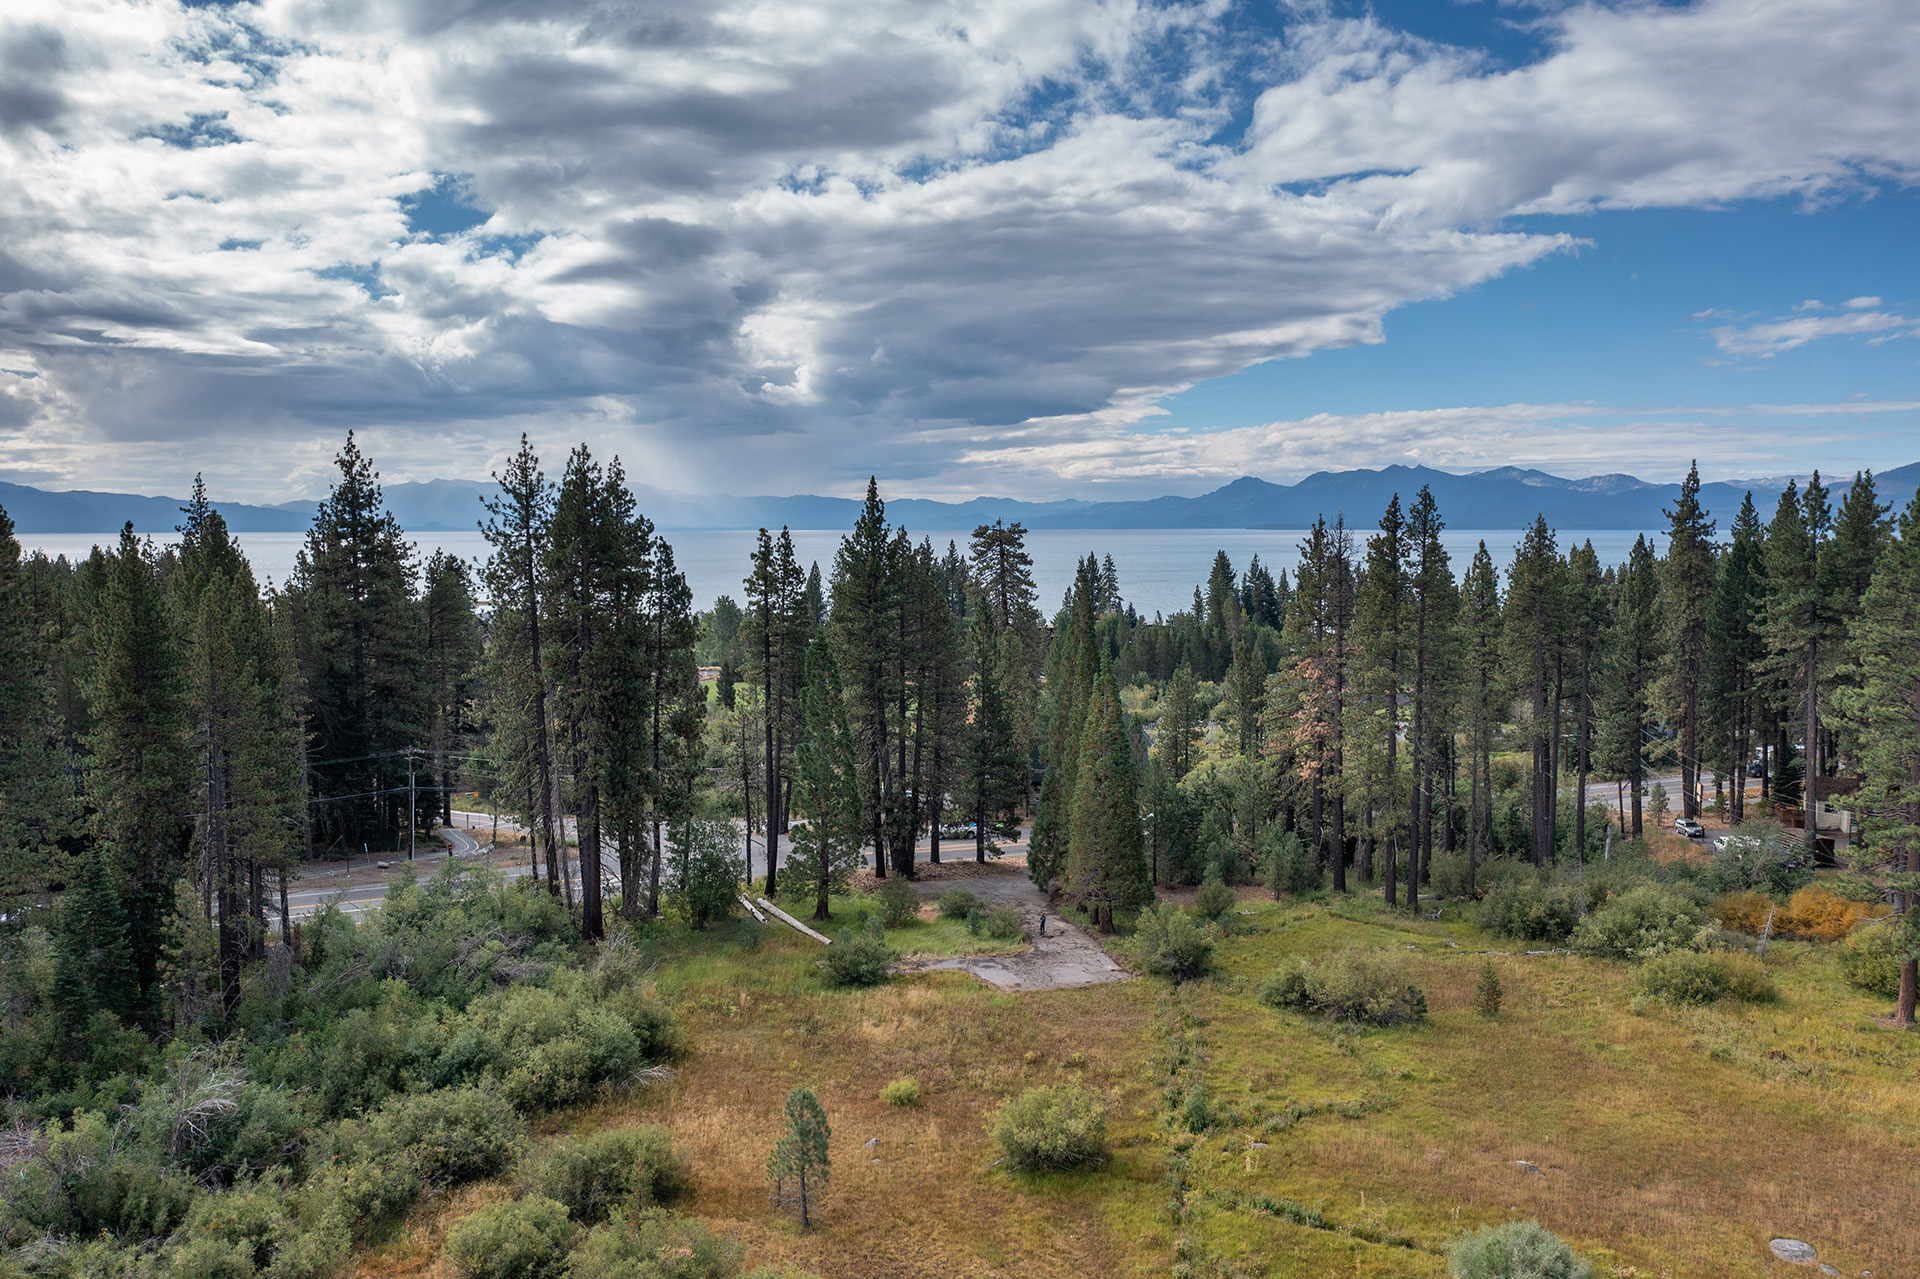 A meadow, a parking area, and lake tahoe in the background